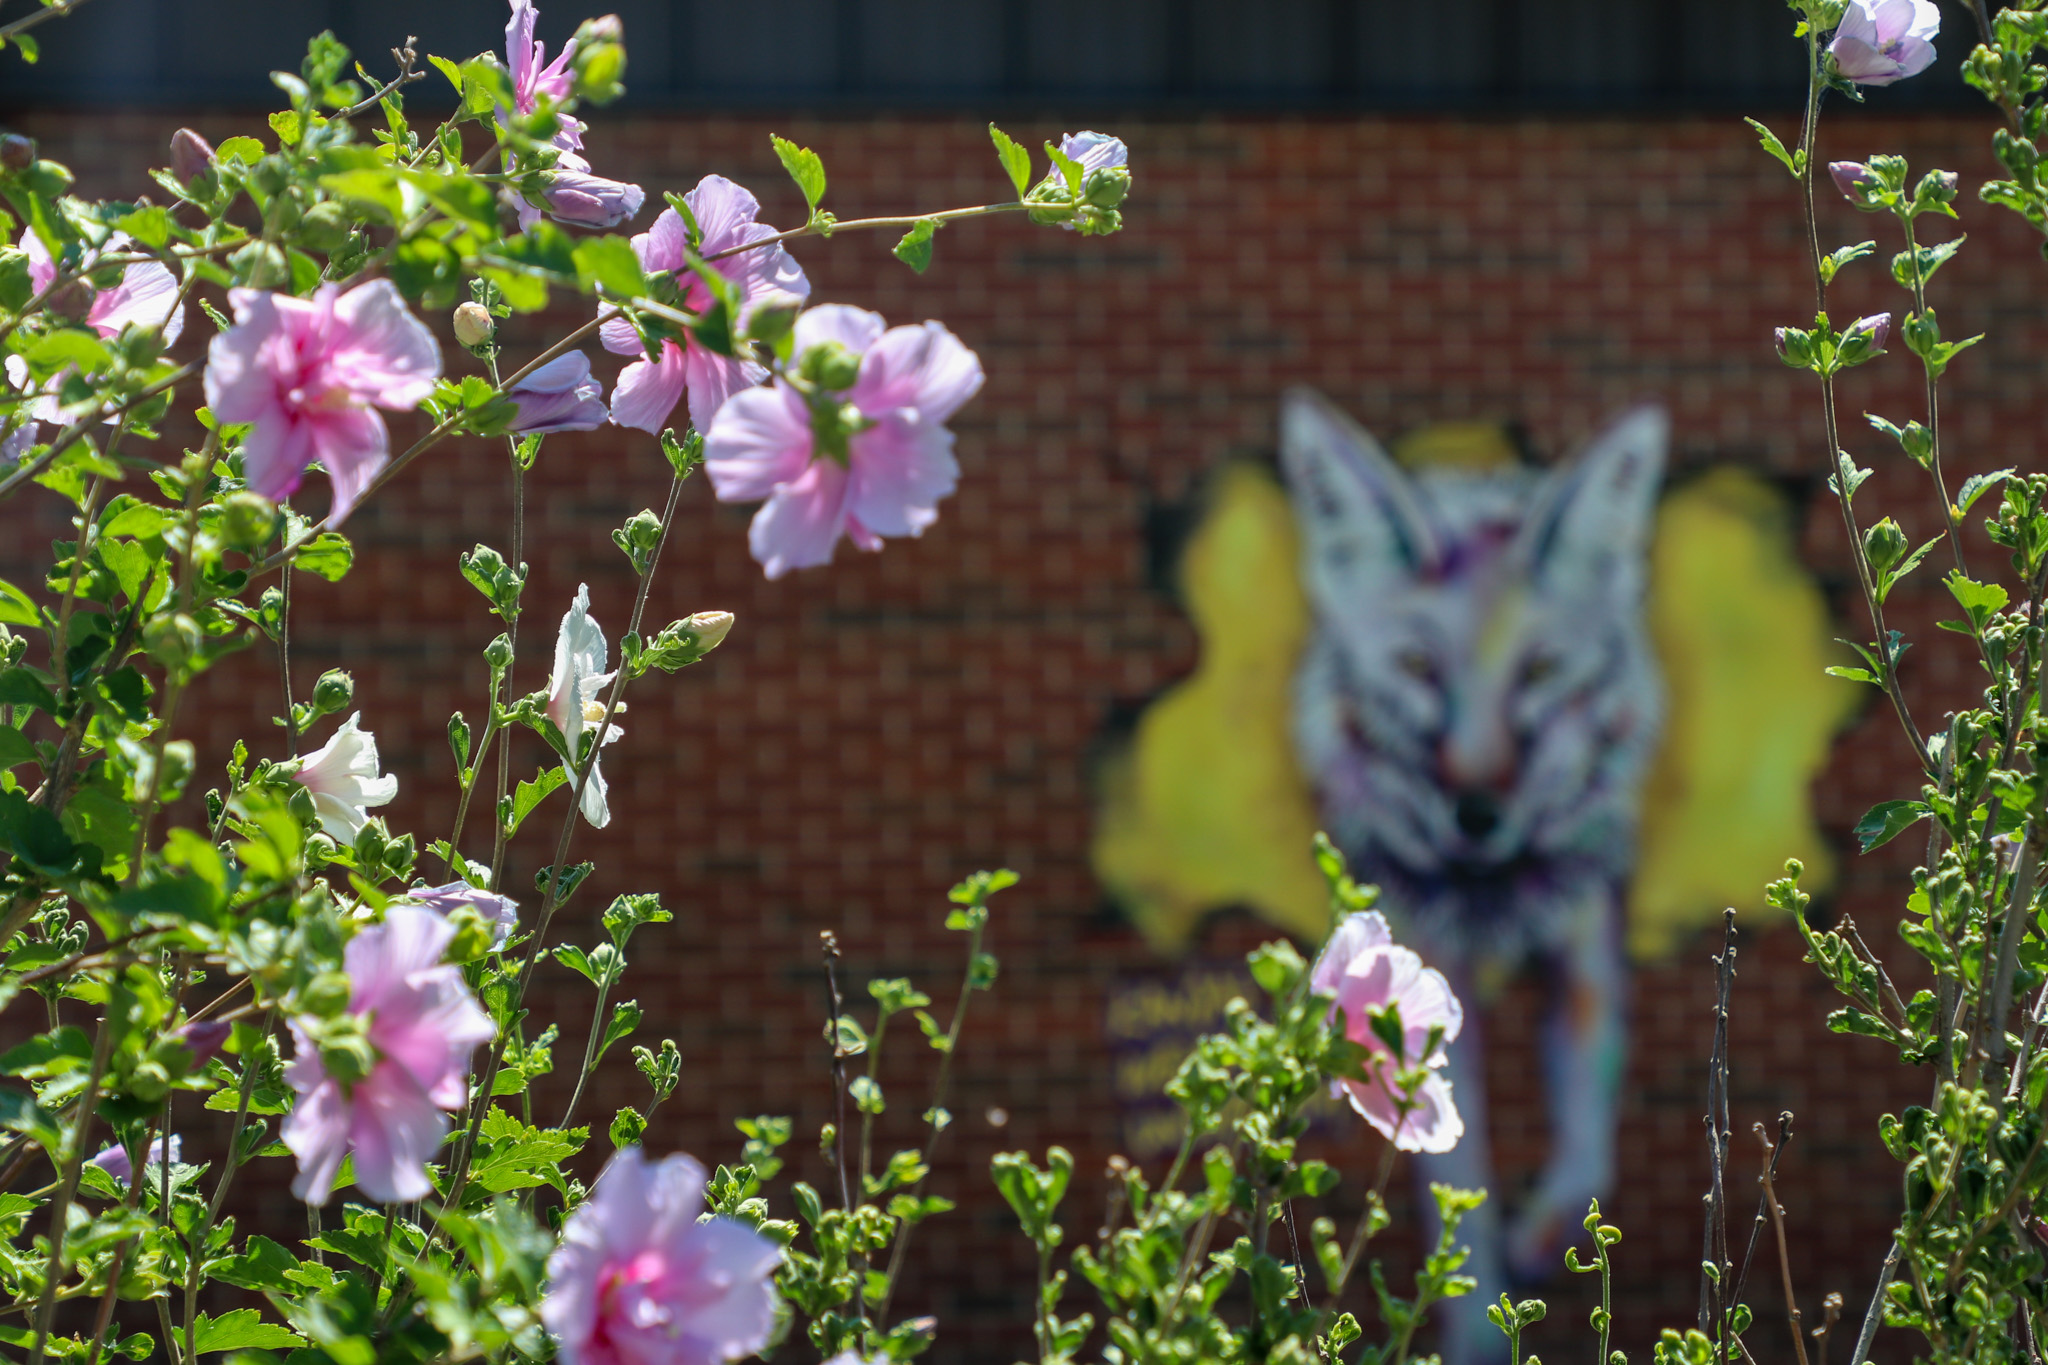 Flowers with Coyote mural in background